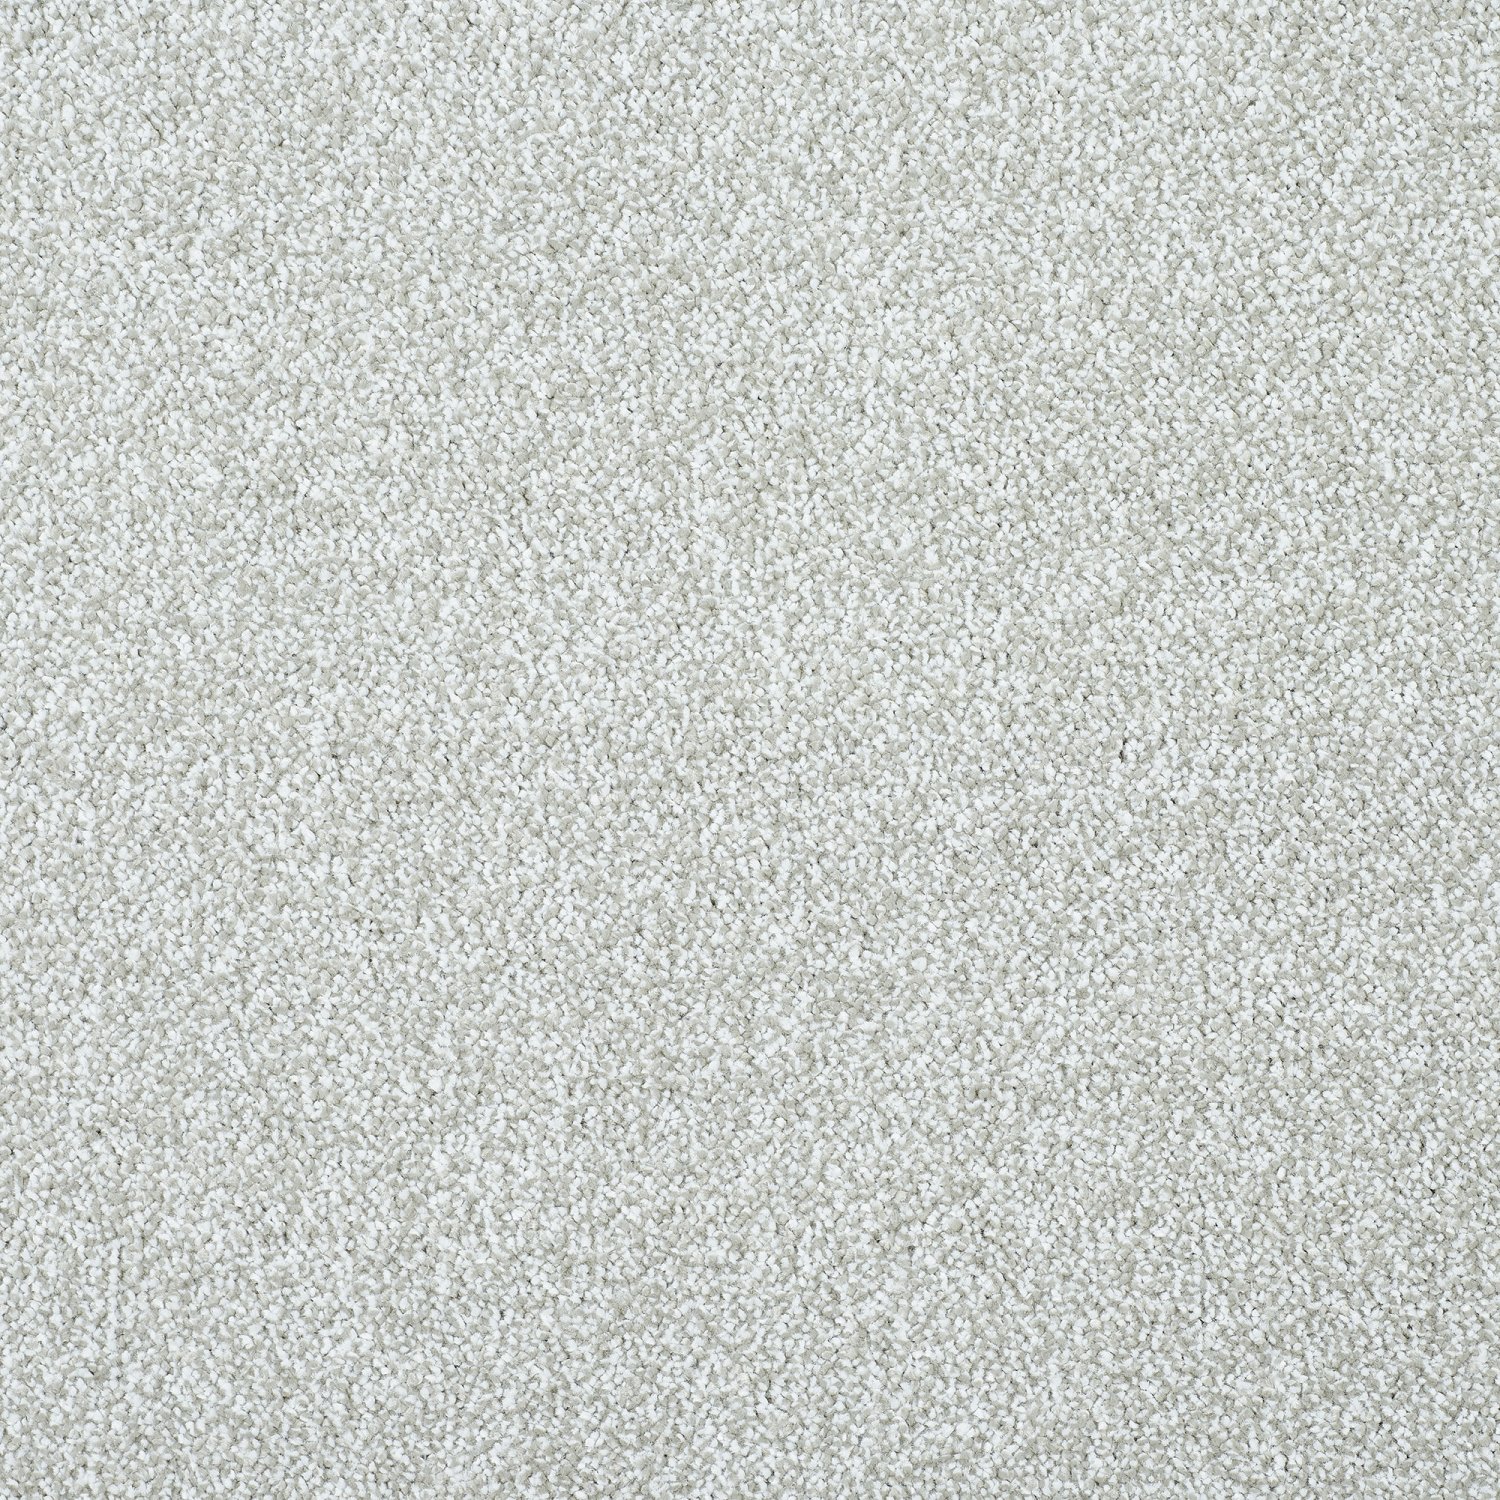 Stainfree Timeless Twist Carpet - 17 Taupe